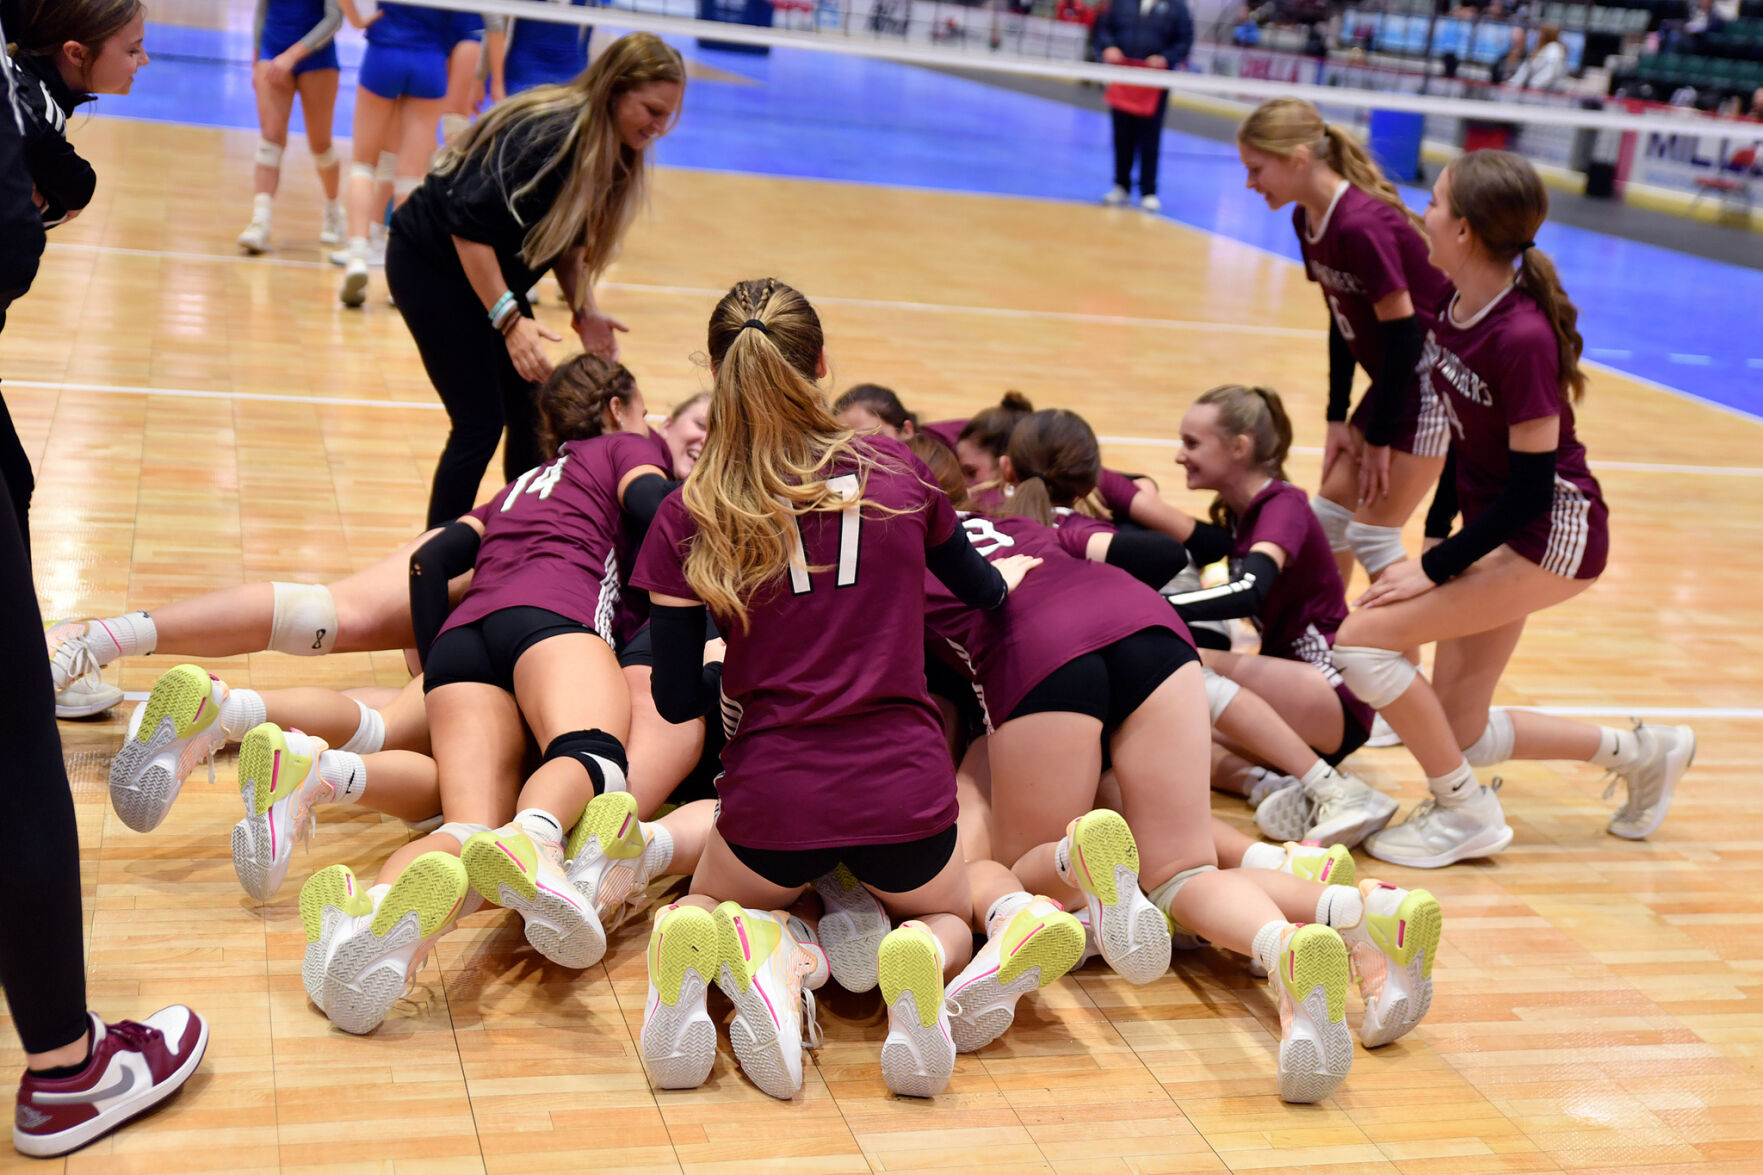 Portville and Chautauqua Lake Crowned State Champions in Girls’ Volleyball